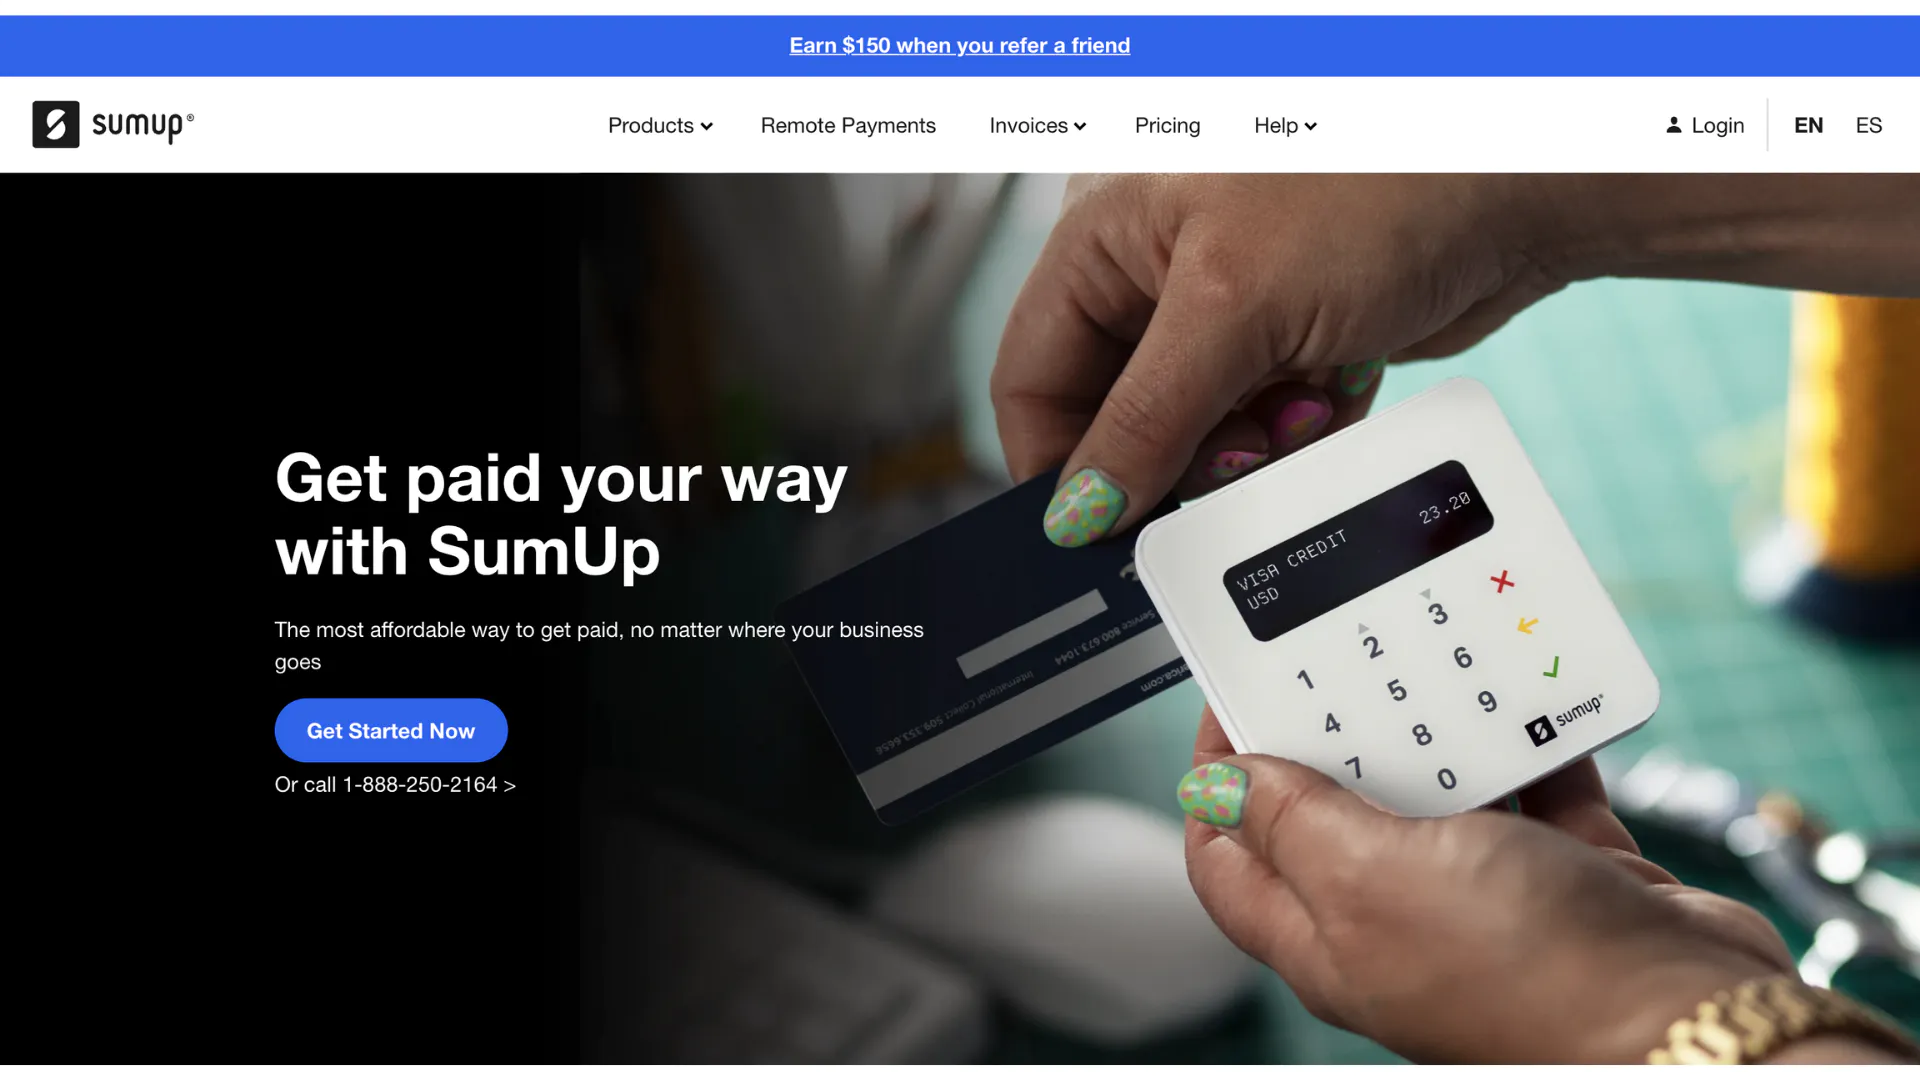 SumUp Industry Based Personalization - Before